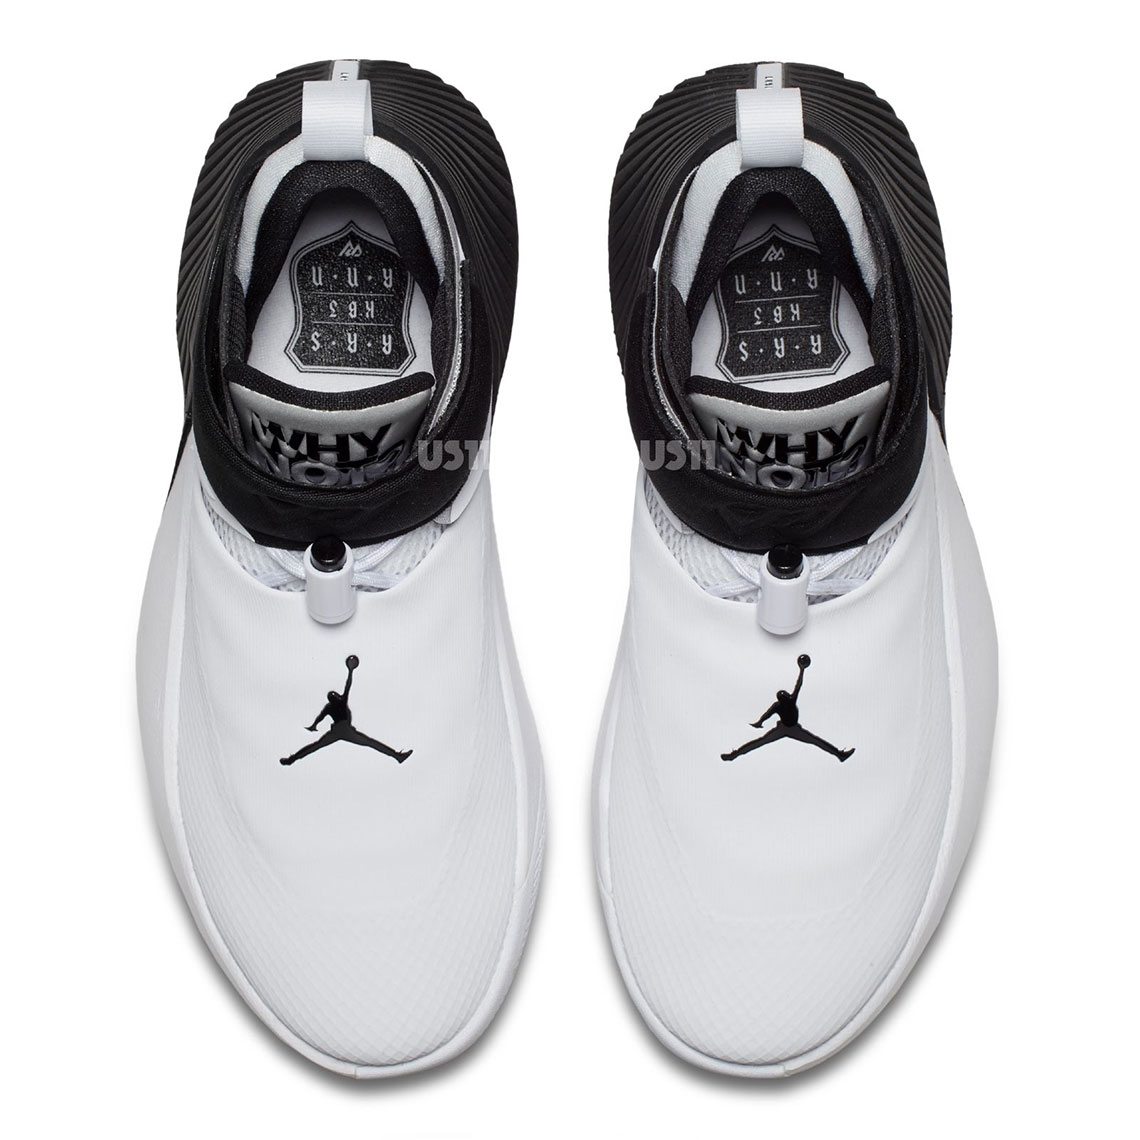 Jordan Fly Next Russell Westbrook Why Not Black White 3